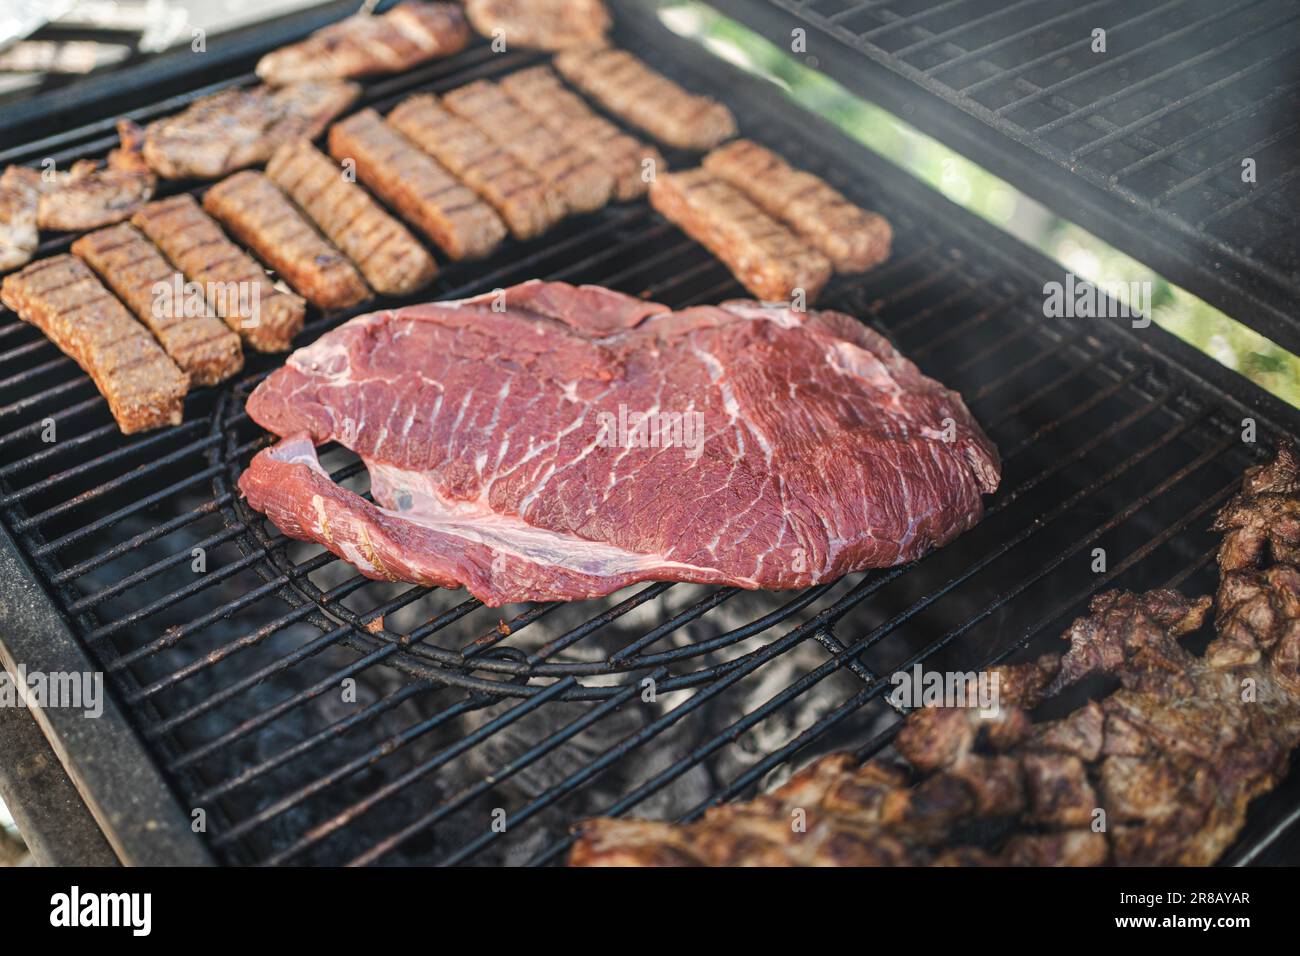 A close-up of an assortment of grilled meats cooking on a hot plate Stock Photo